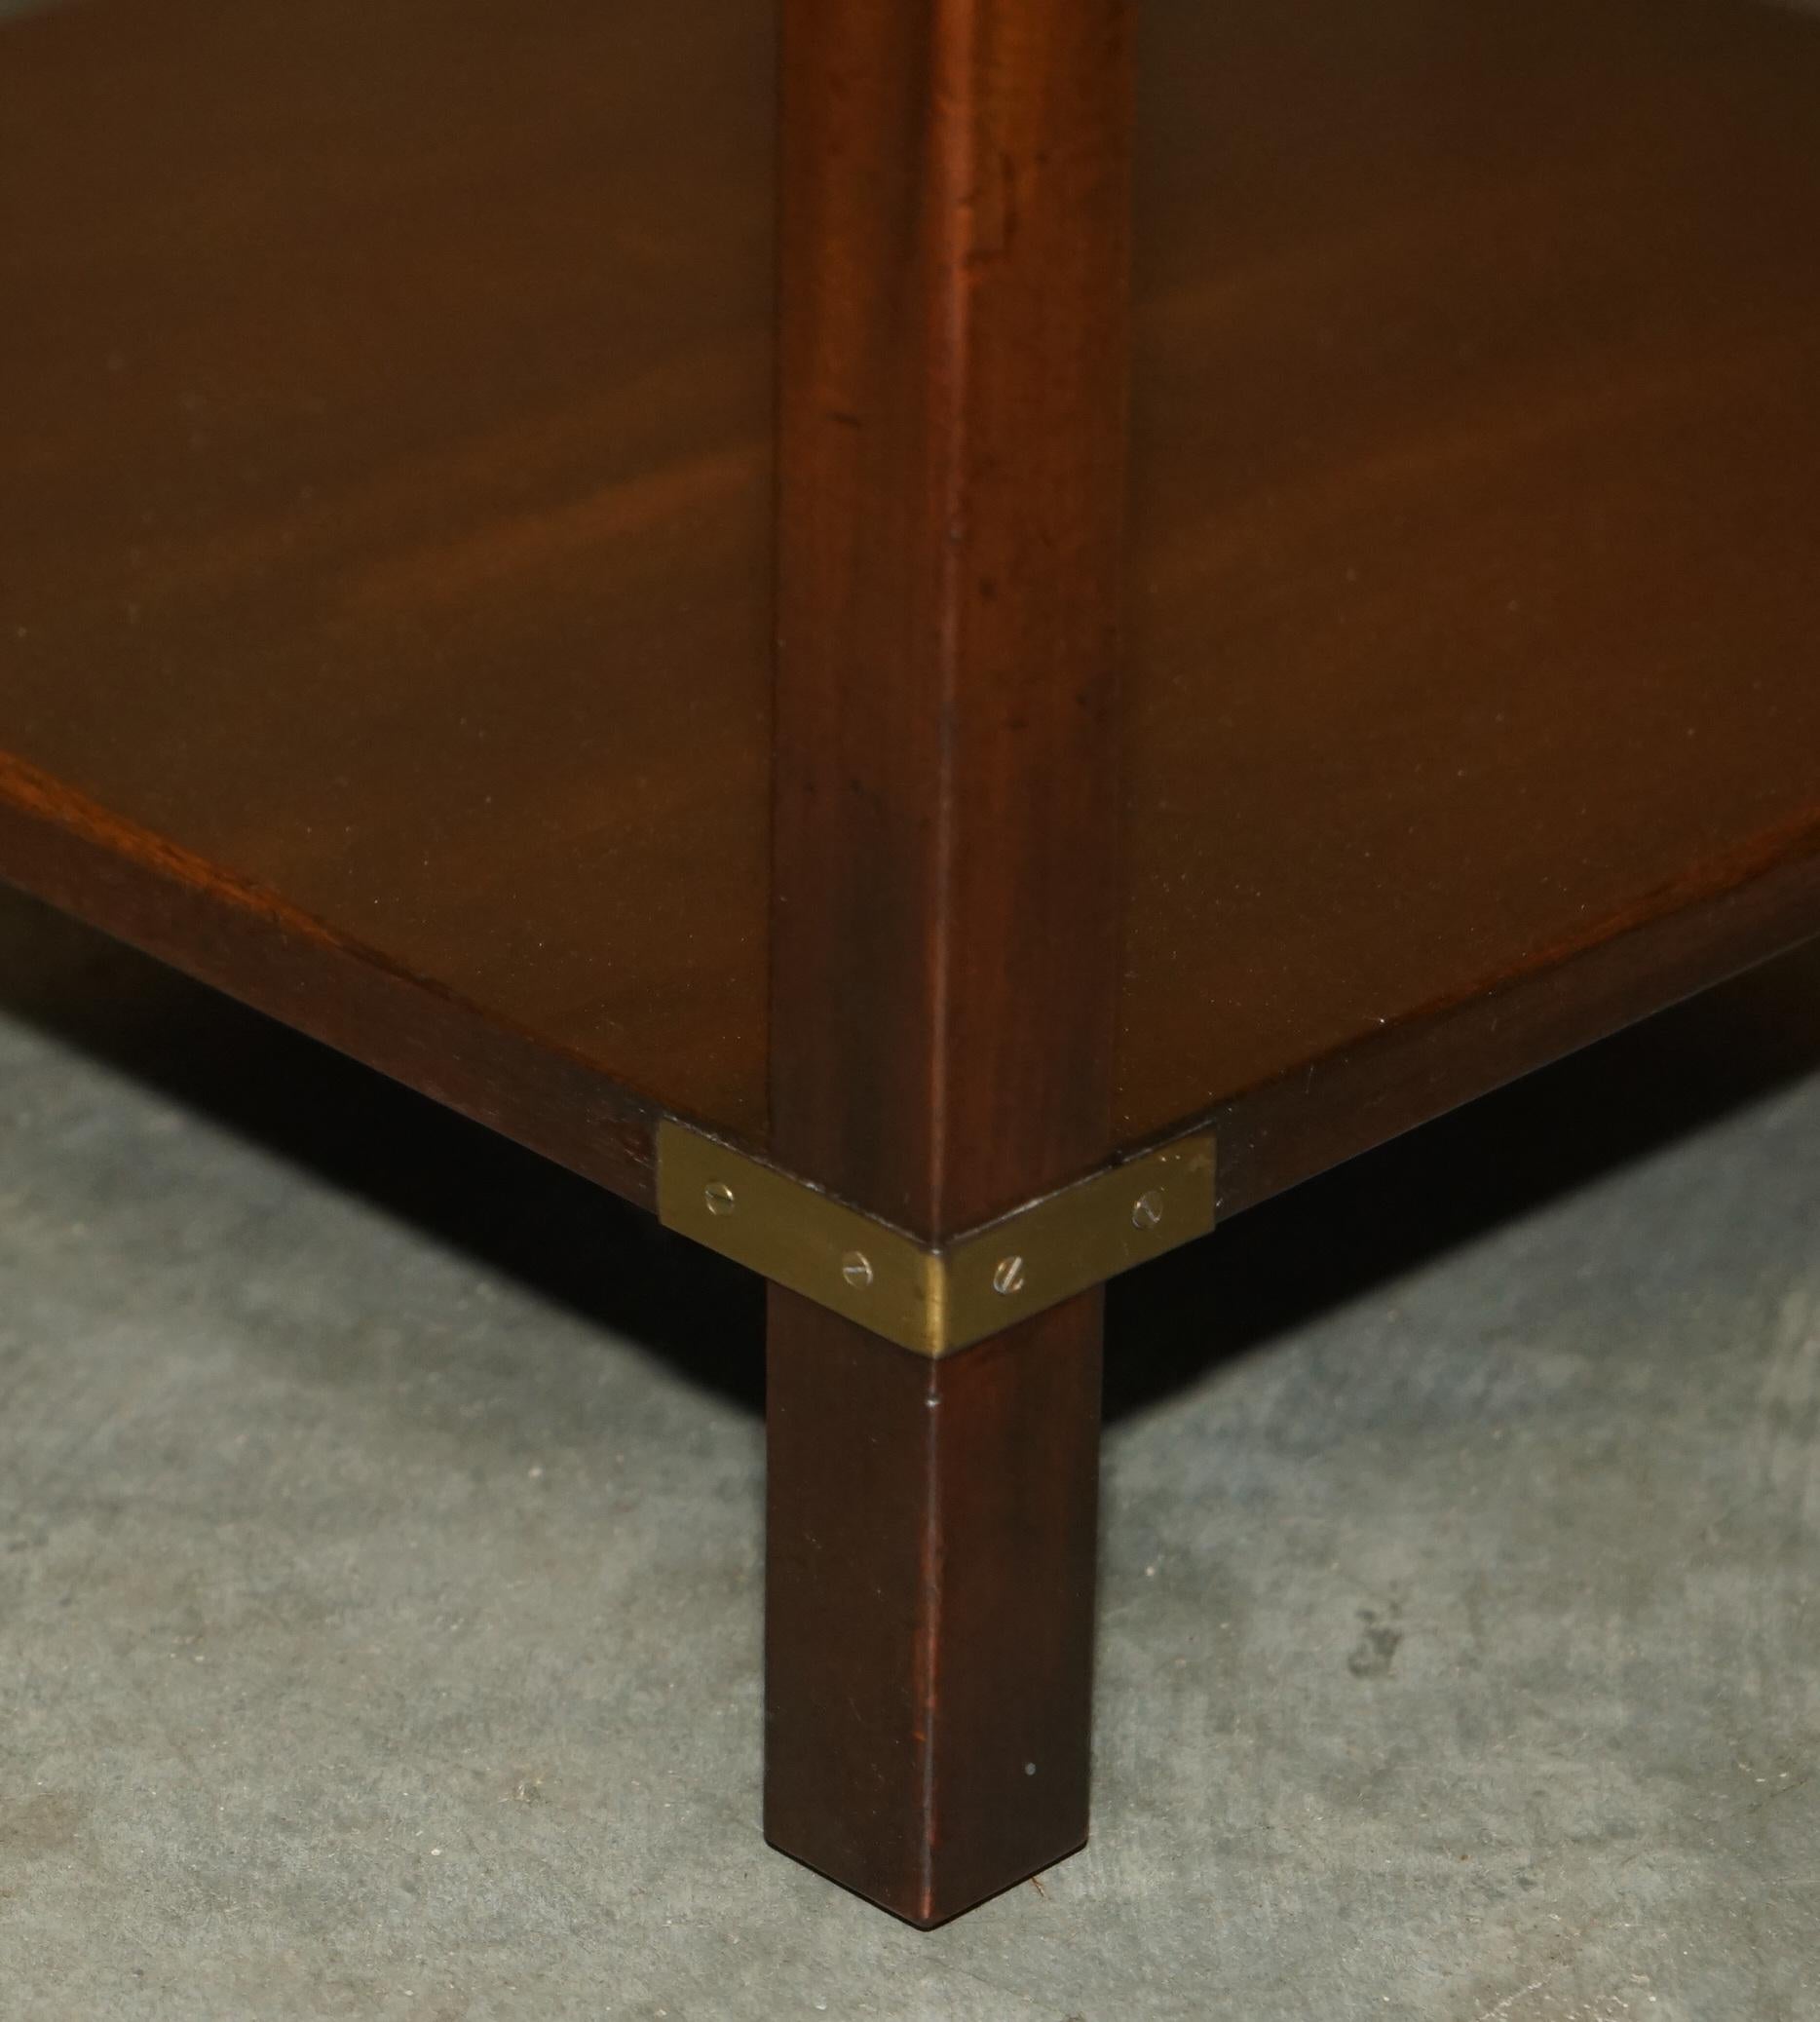 LUXURY HARRODS LONDON KENNEDY MILITARY CAMPAIGN HiGH SIDE END TABLE HARDWOOD For Sale 4